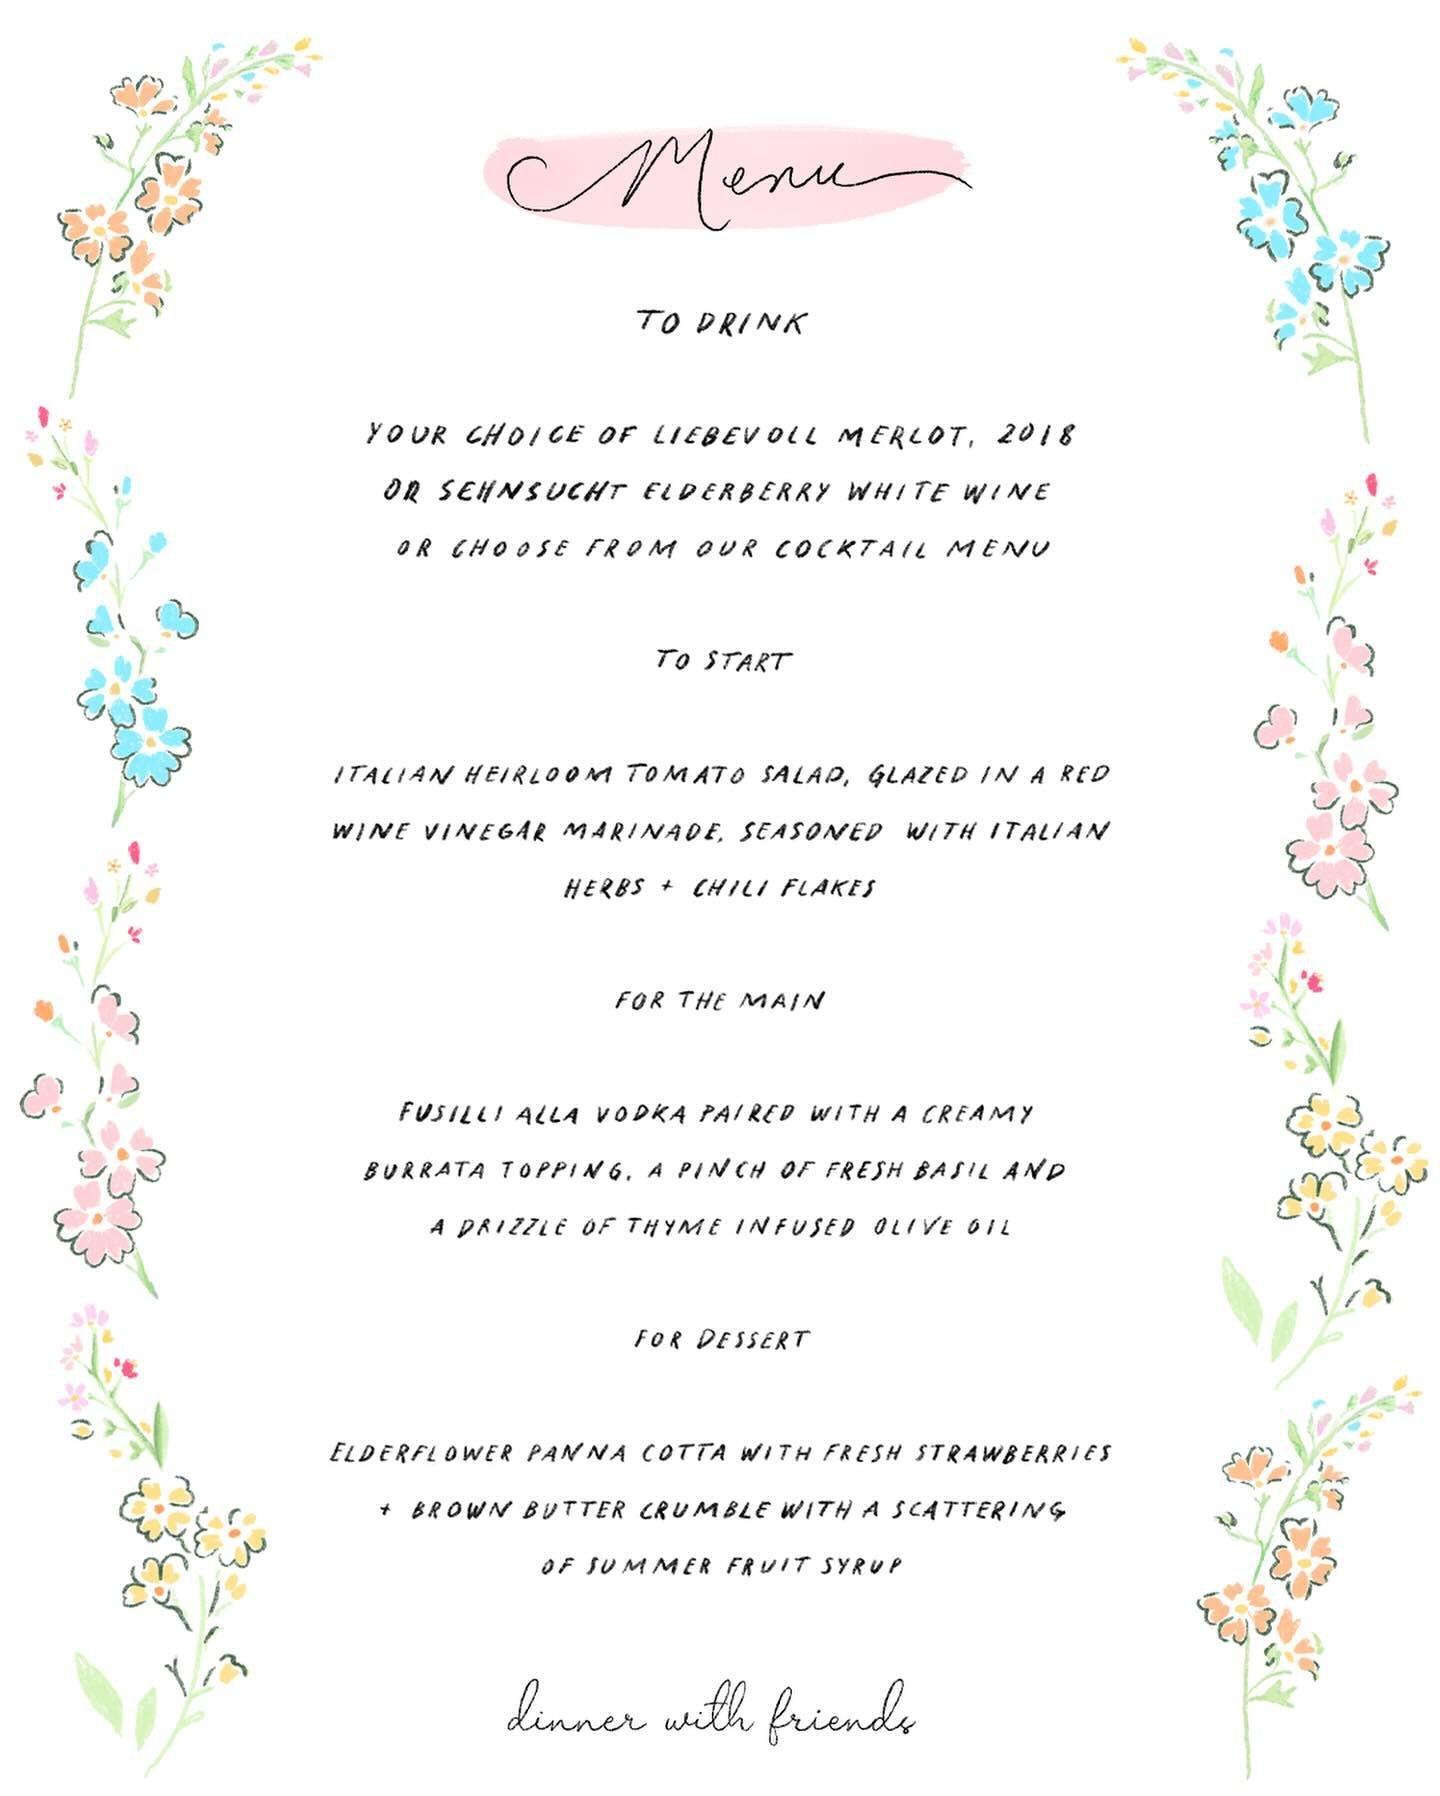 🌸🌿 Wildflower Menu 🌿🌸

A brand new menu design (that we might make into a collection of save the date, invitation &amp; menu templates for you to buy !) inspired by wildflower meadows 🫶💖

Some fun facts about the wildflower menu:

💌 The floral